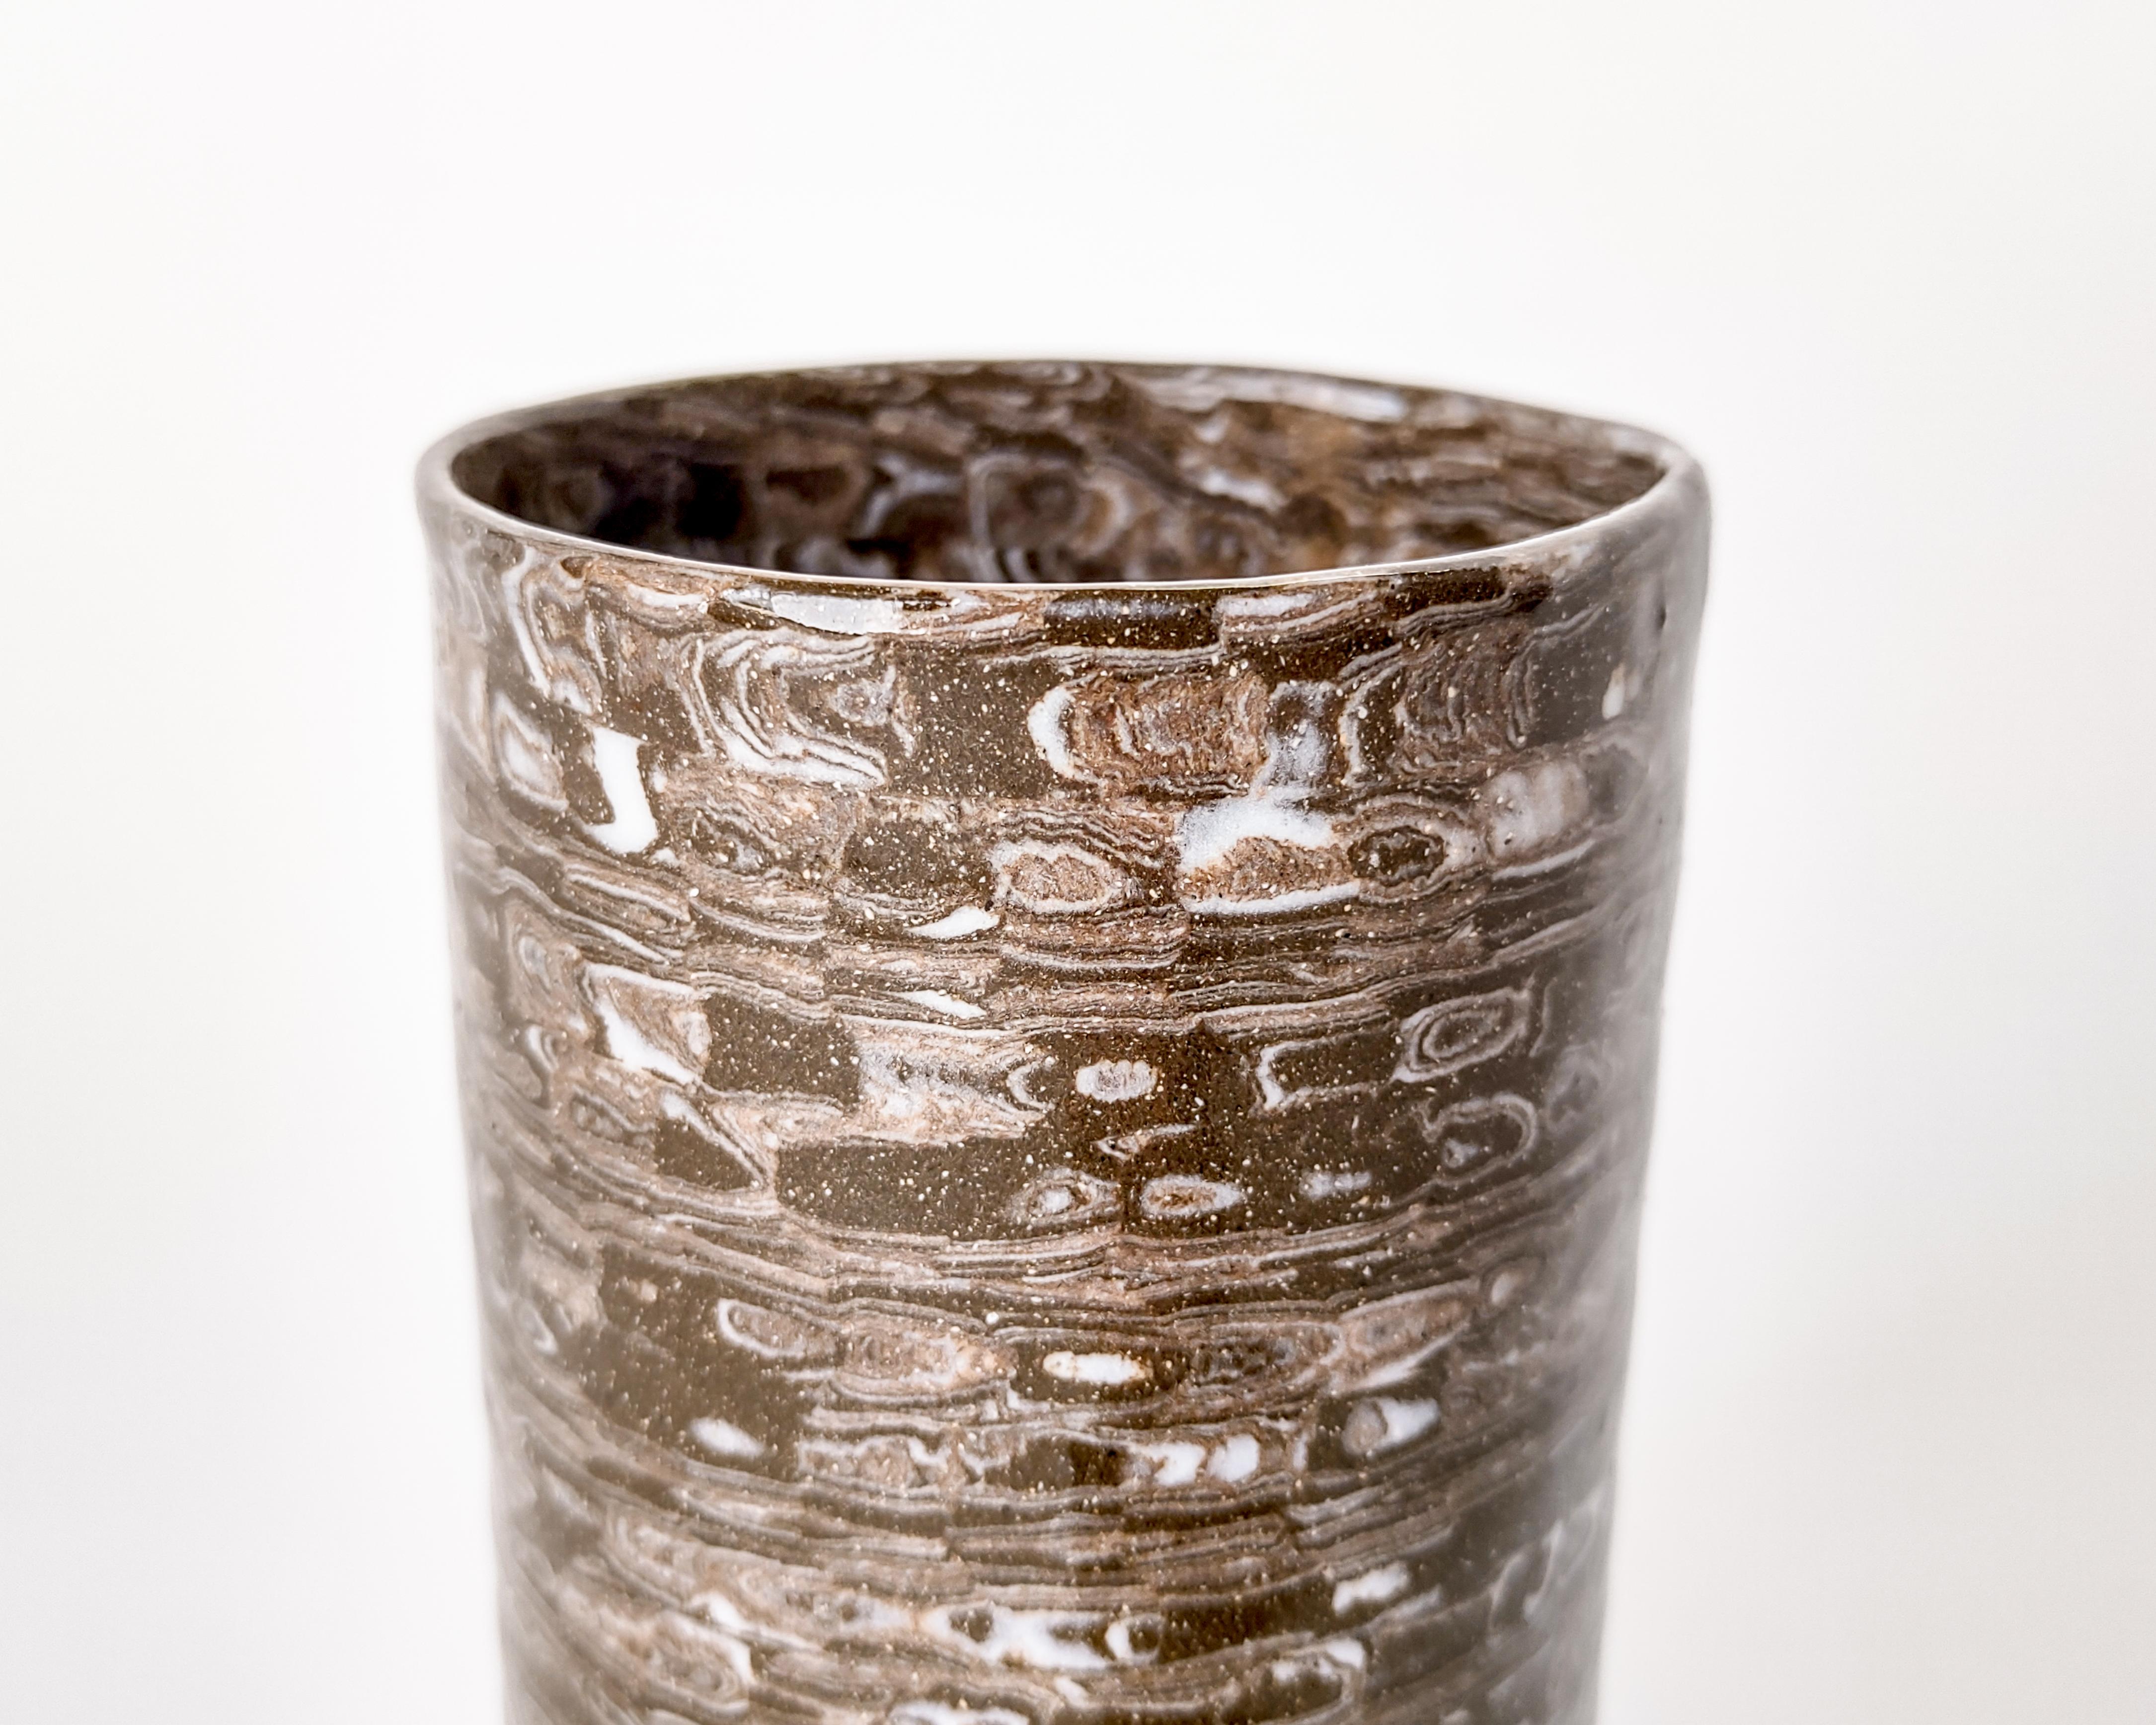 Handmade nerikomi vase with multiple colored clays. Black-brown speckled clay with colorful details integral to the vase. Made and fired in Los Angeles by Fizzy Ceramics in 2022. Glazed clear on the outside and inside, the black clay turns brown